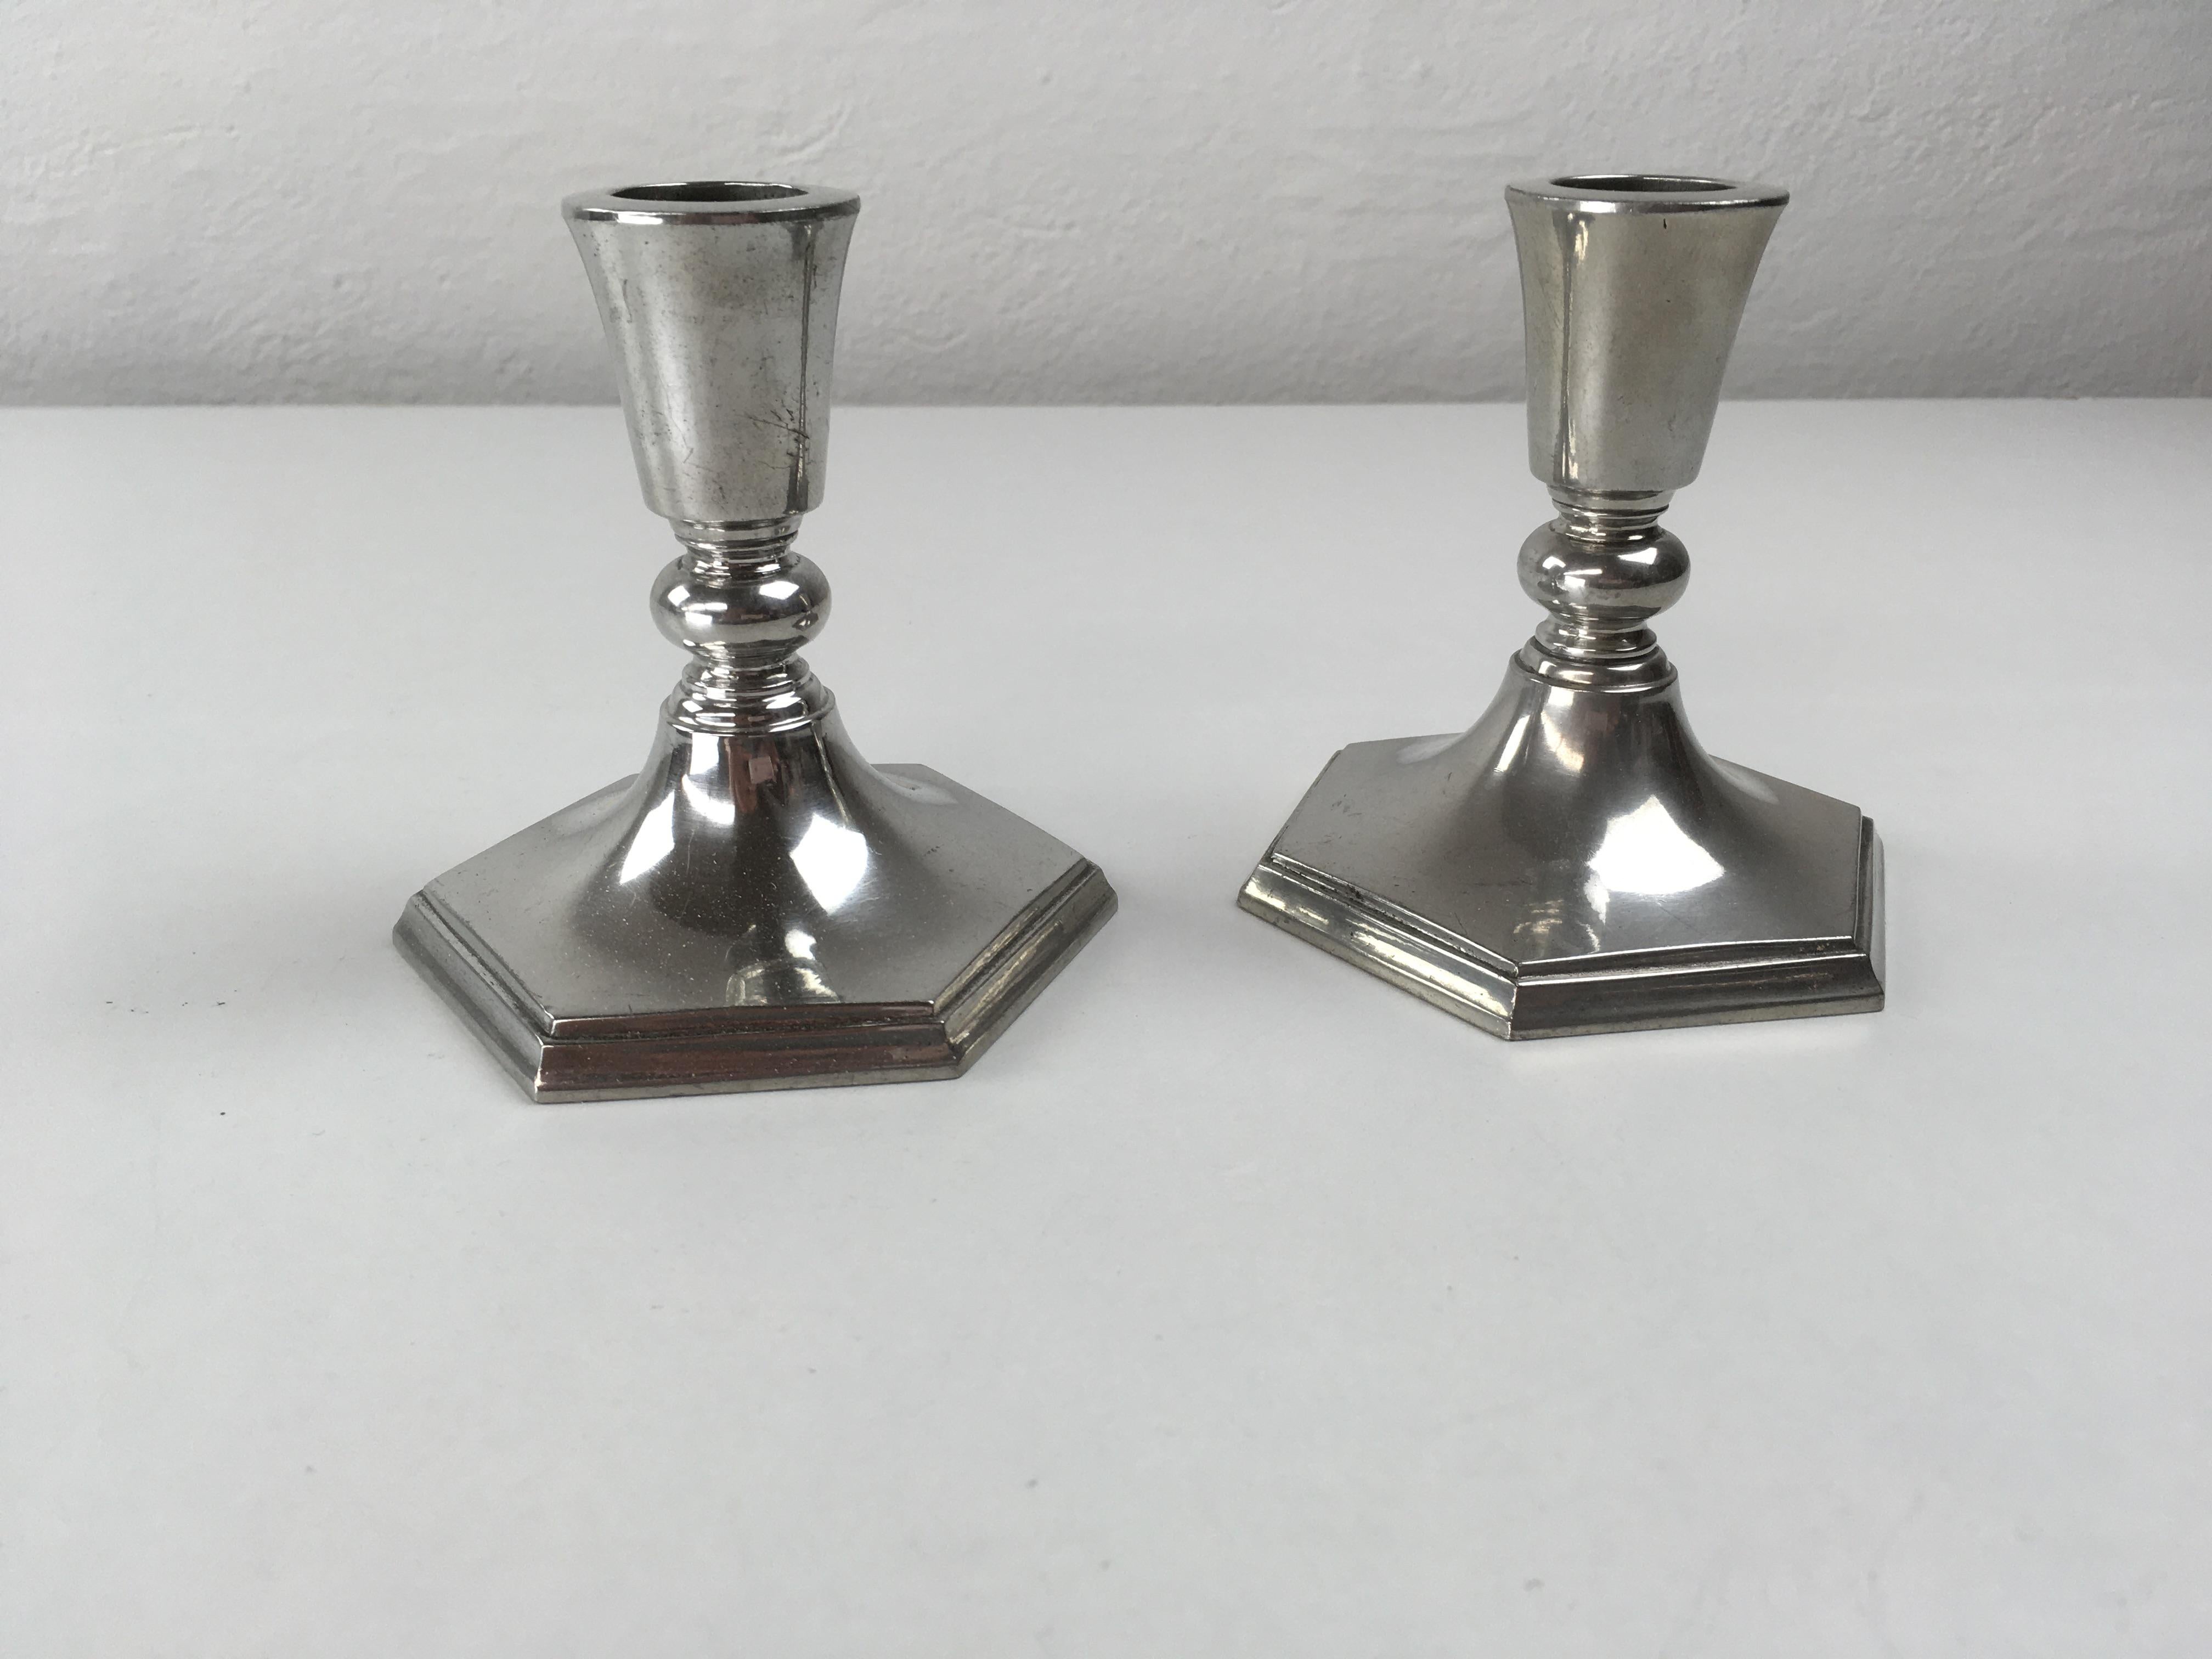 Set of two Danish Just Andersen art deco pewter candle holders produced by Just Andersen A/S in the 1930's.

The candle holders are in good vintage condition and marked with Just. Andersens triangle mark. 

Just Andersen 1884-1943 was born in